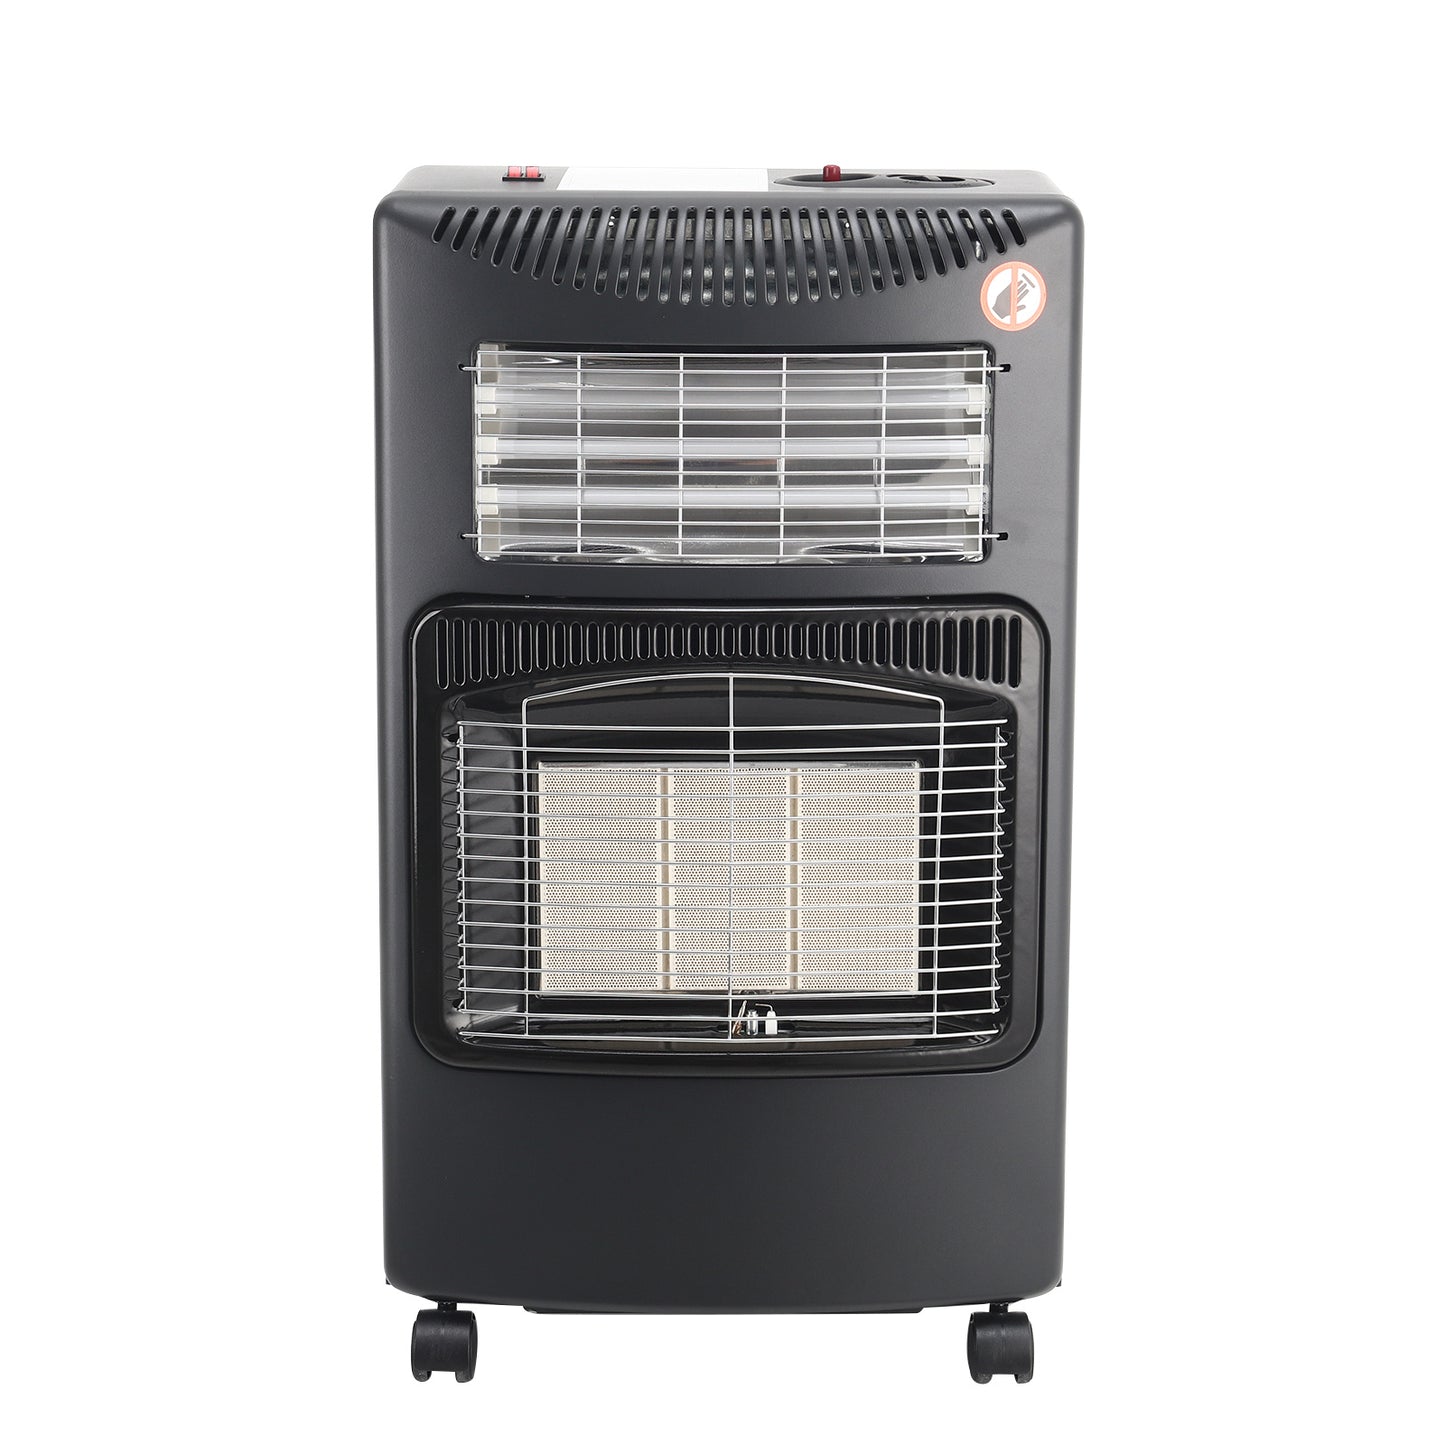 4.2kW Mobile Over Gas Space Heater, Black